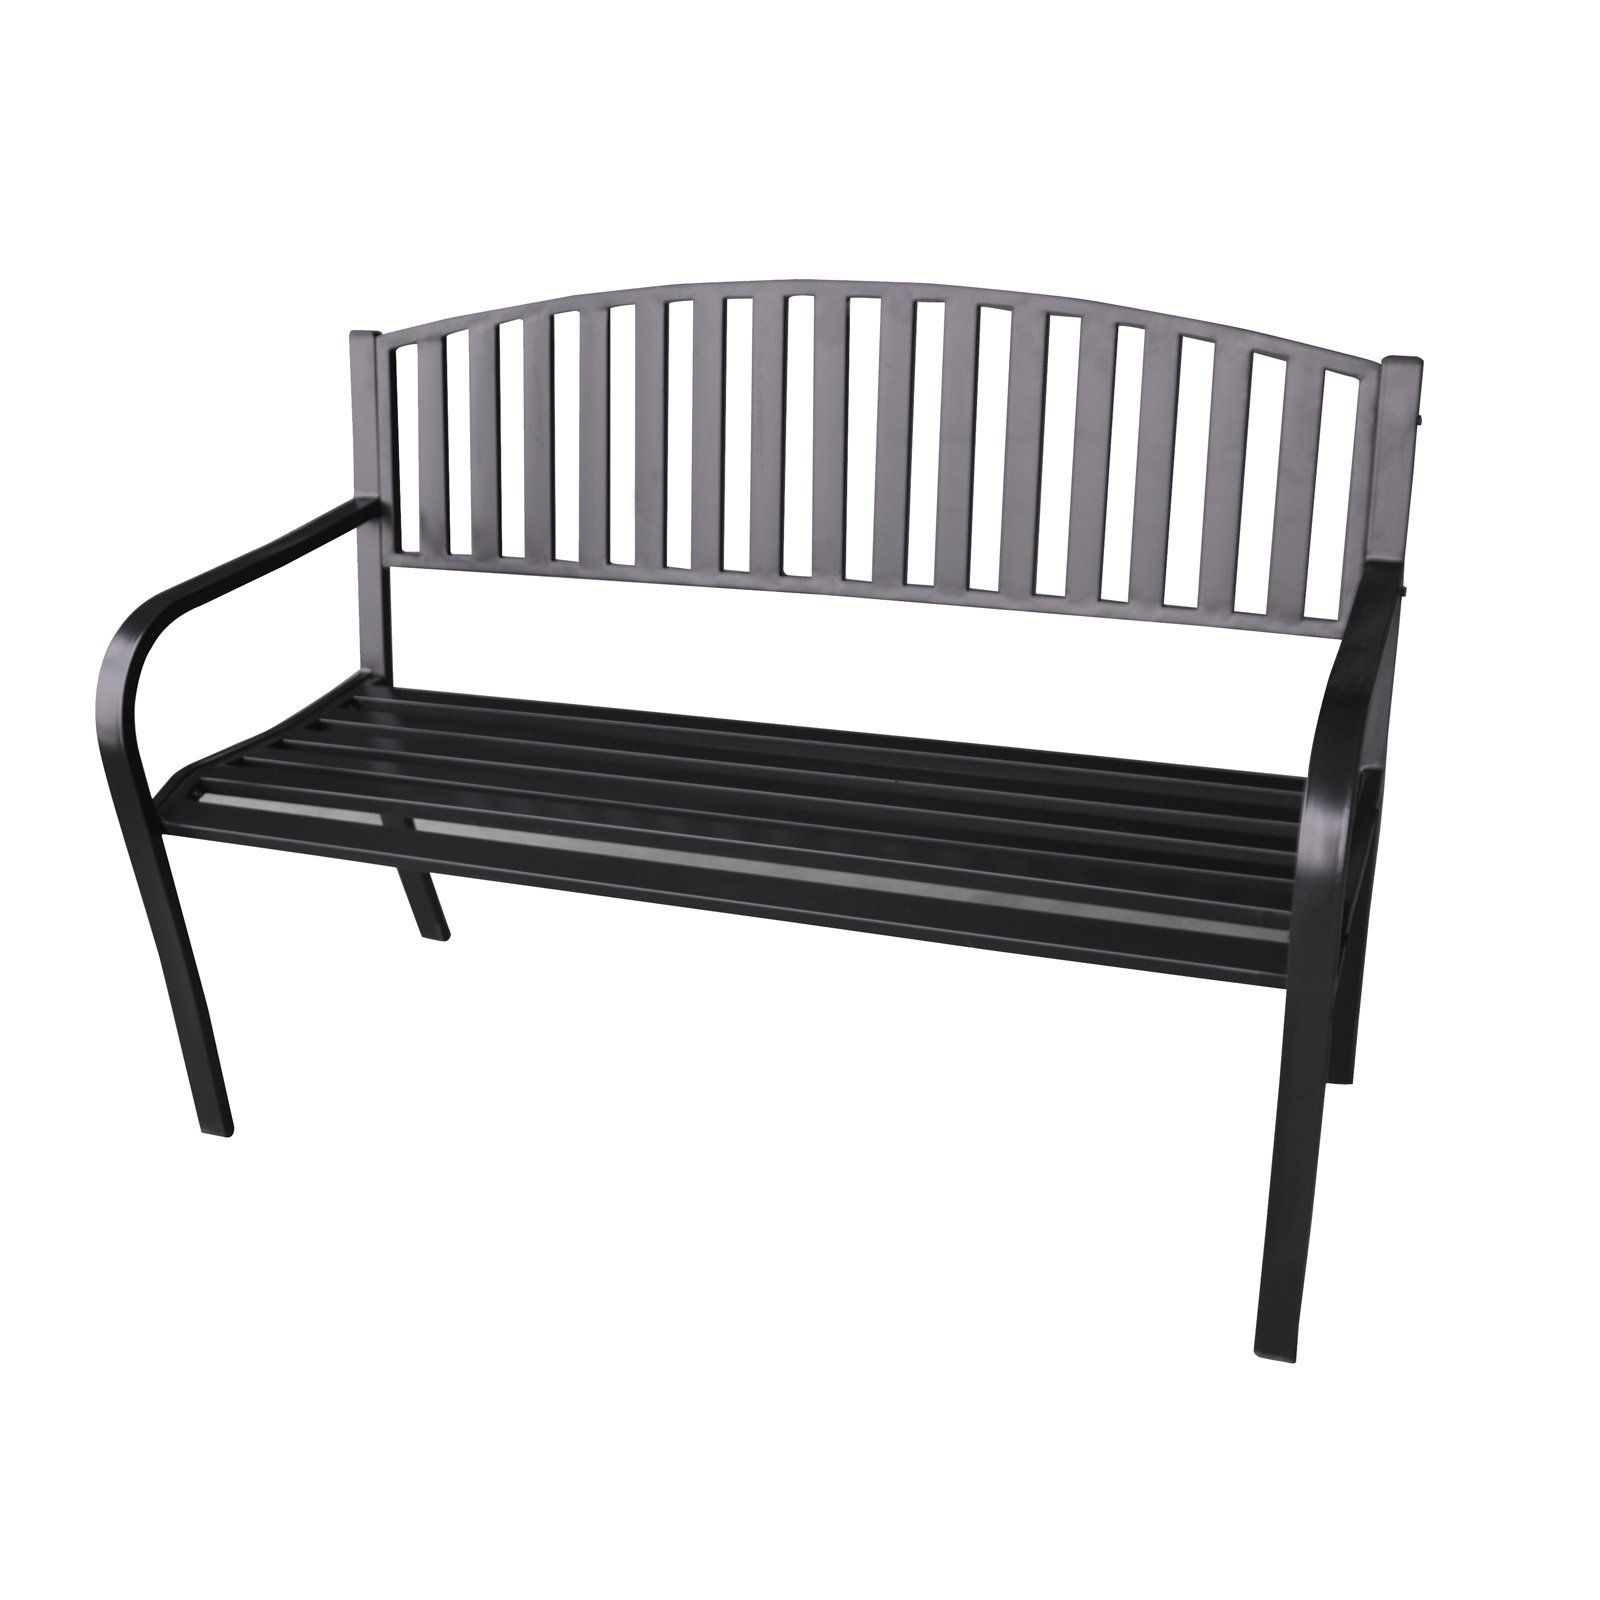 Abble Steel Slat Back Garden Bench – Black In 2020 | Patio Throughout Pettit Steel Garden Benches (View 7 of 25)